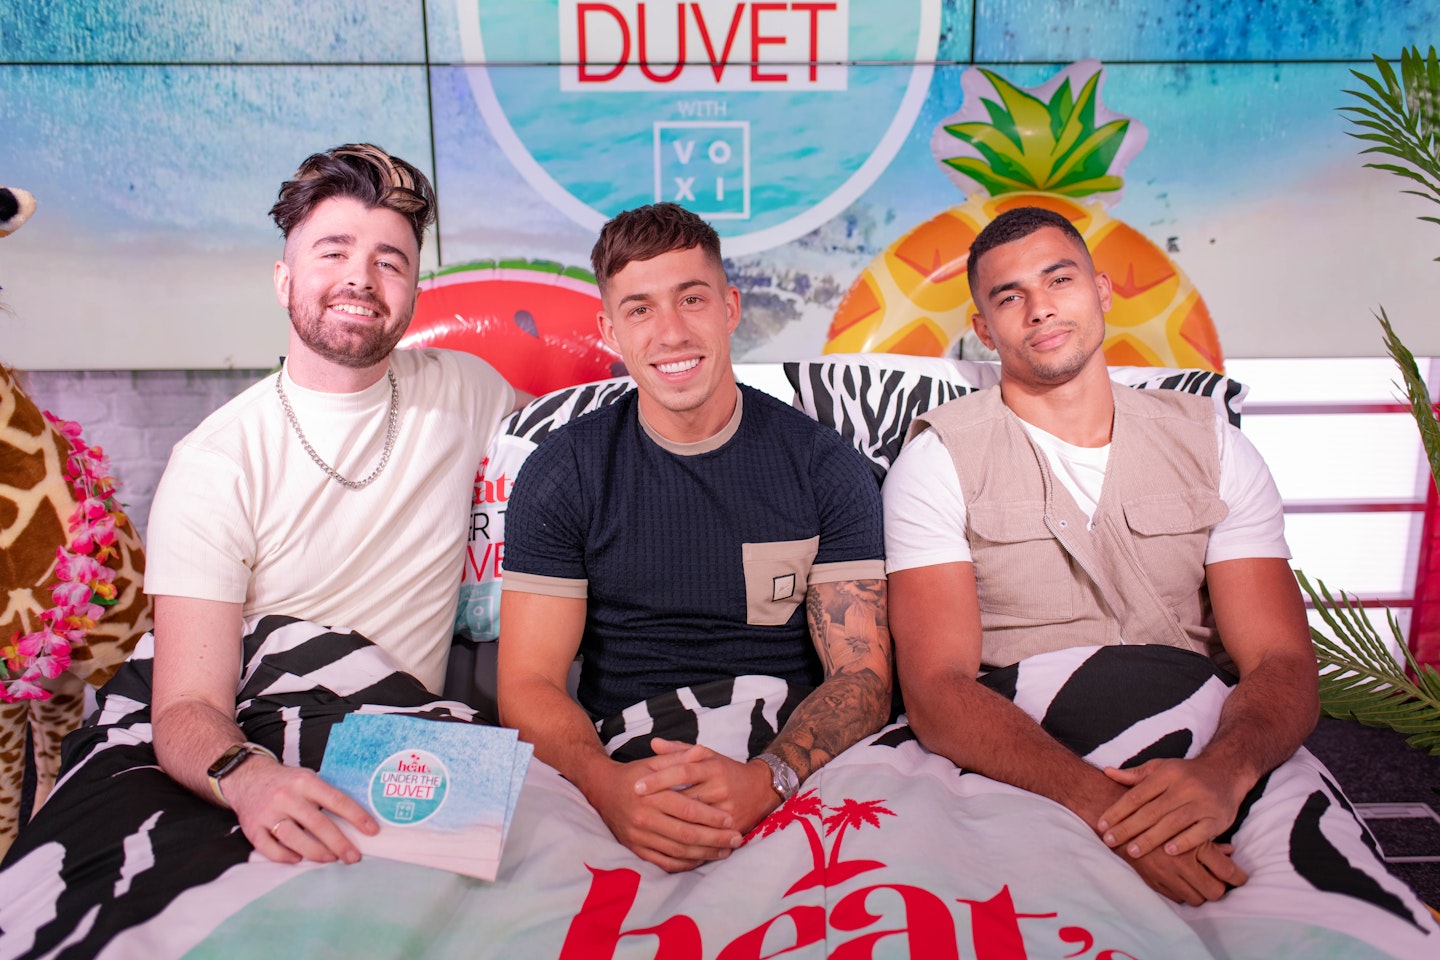 Jordan Lee with Love Island's Connor Durman and Connagh Howard on heat's Under the Duvet with VOXI